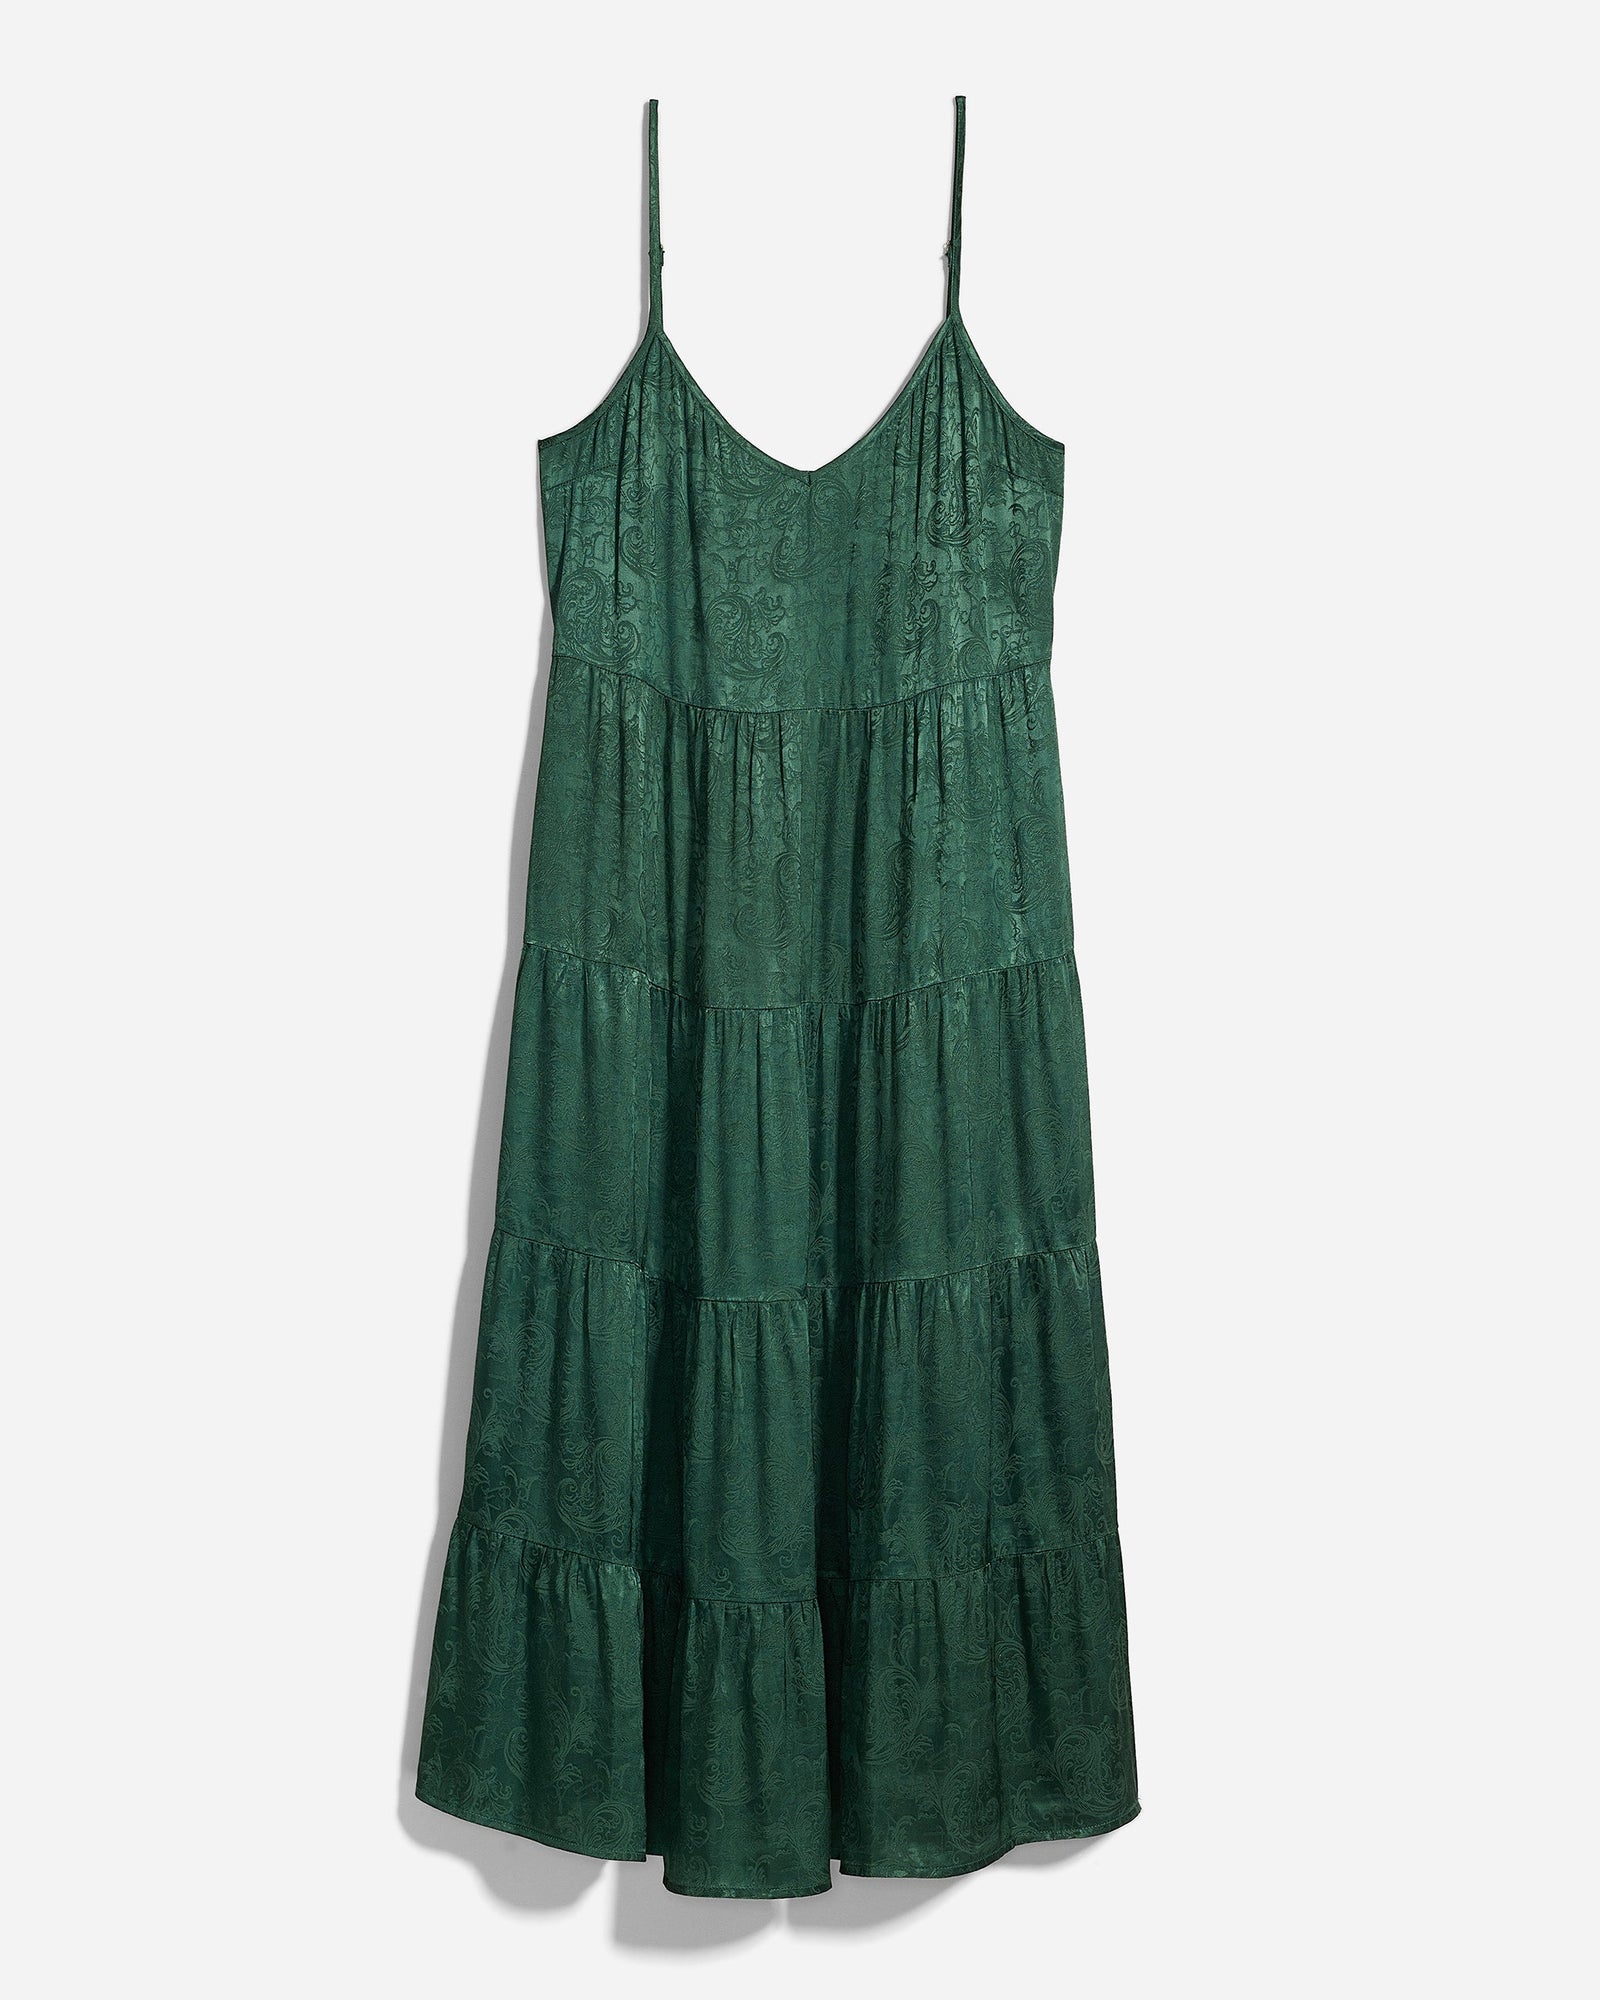 Beth's Paisley Jacquard Emerald Green Midi dress by Auguste the Label